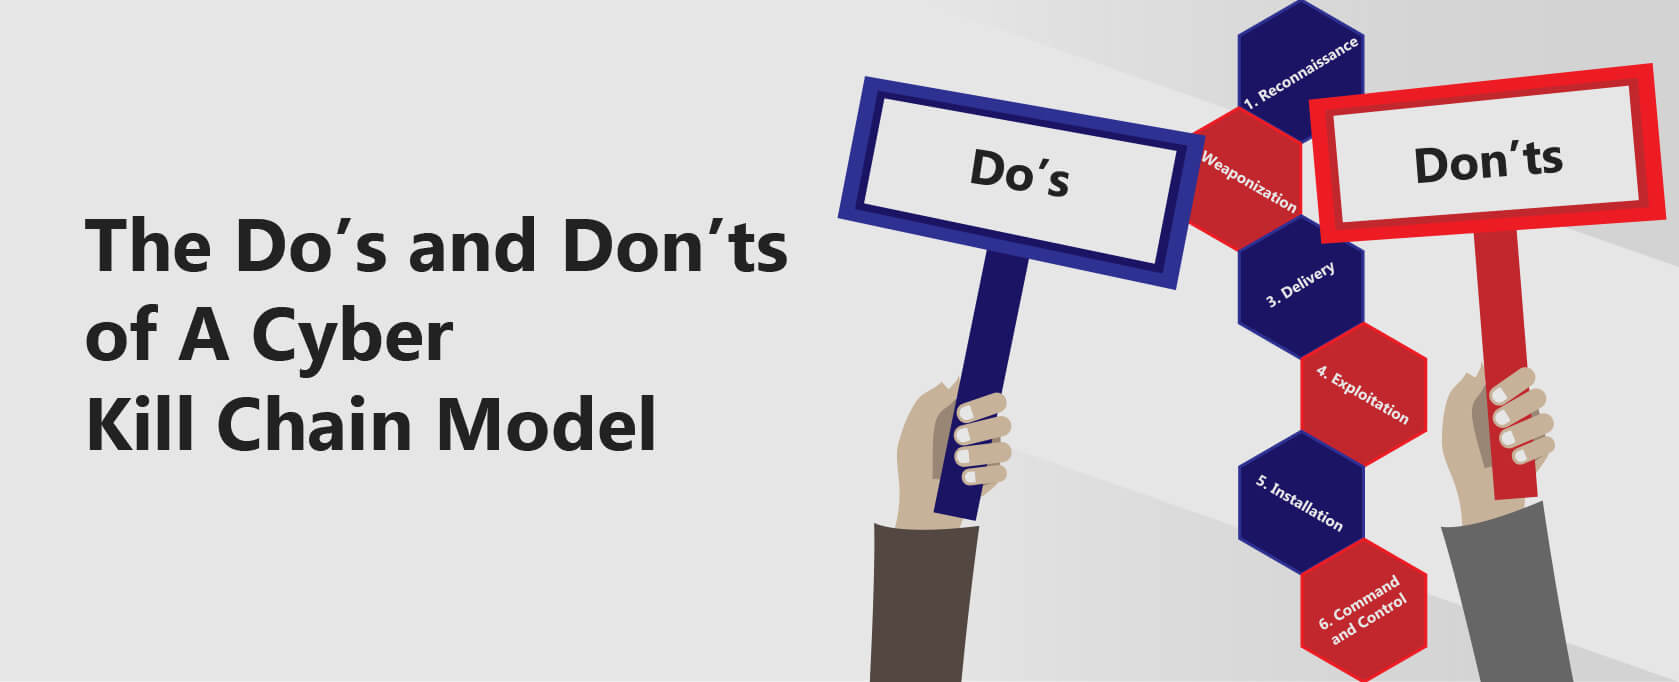 The Do’s and Don’ts of A Cyber Kill Chain Model